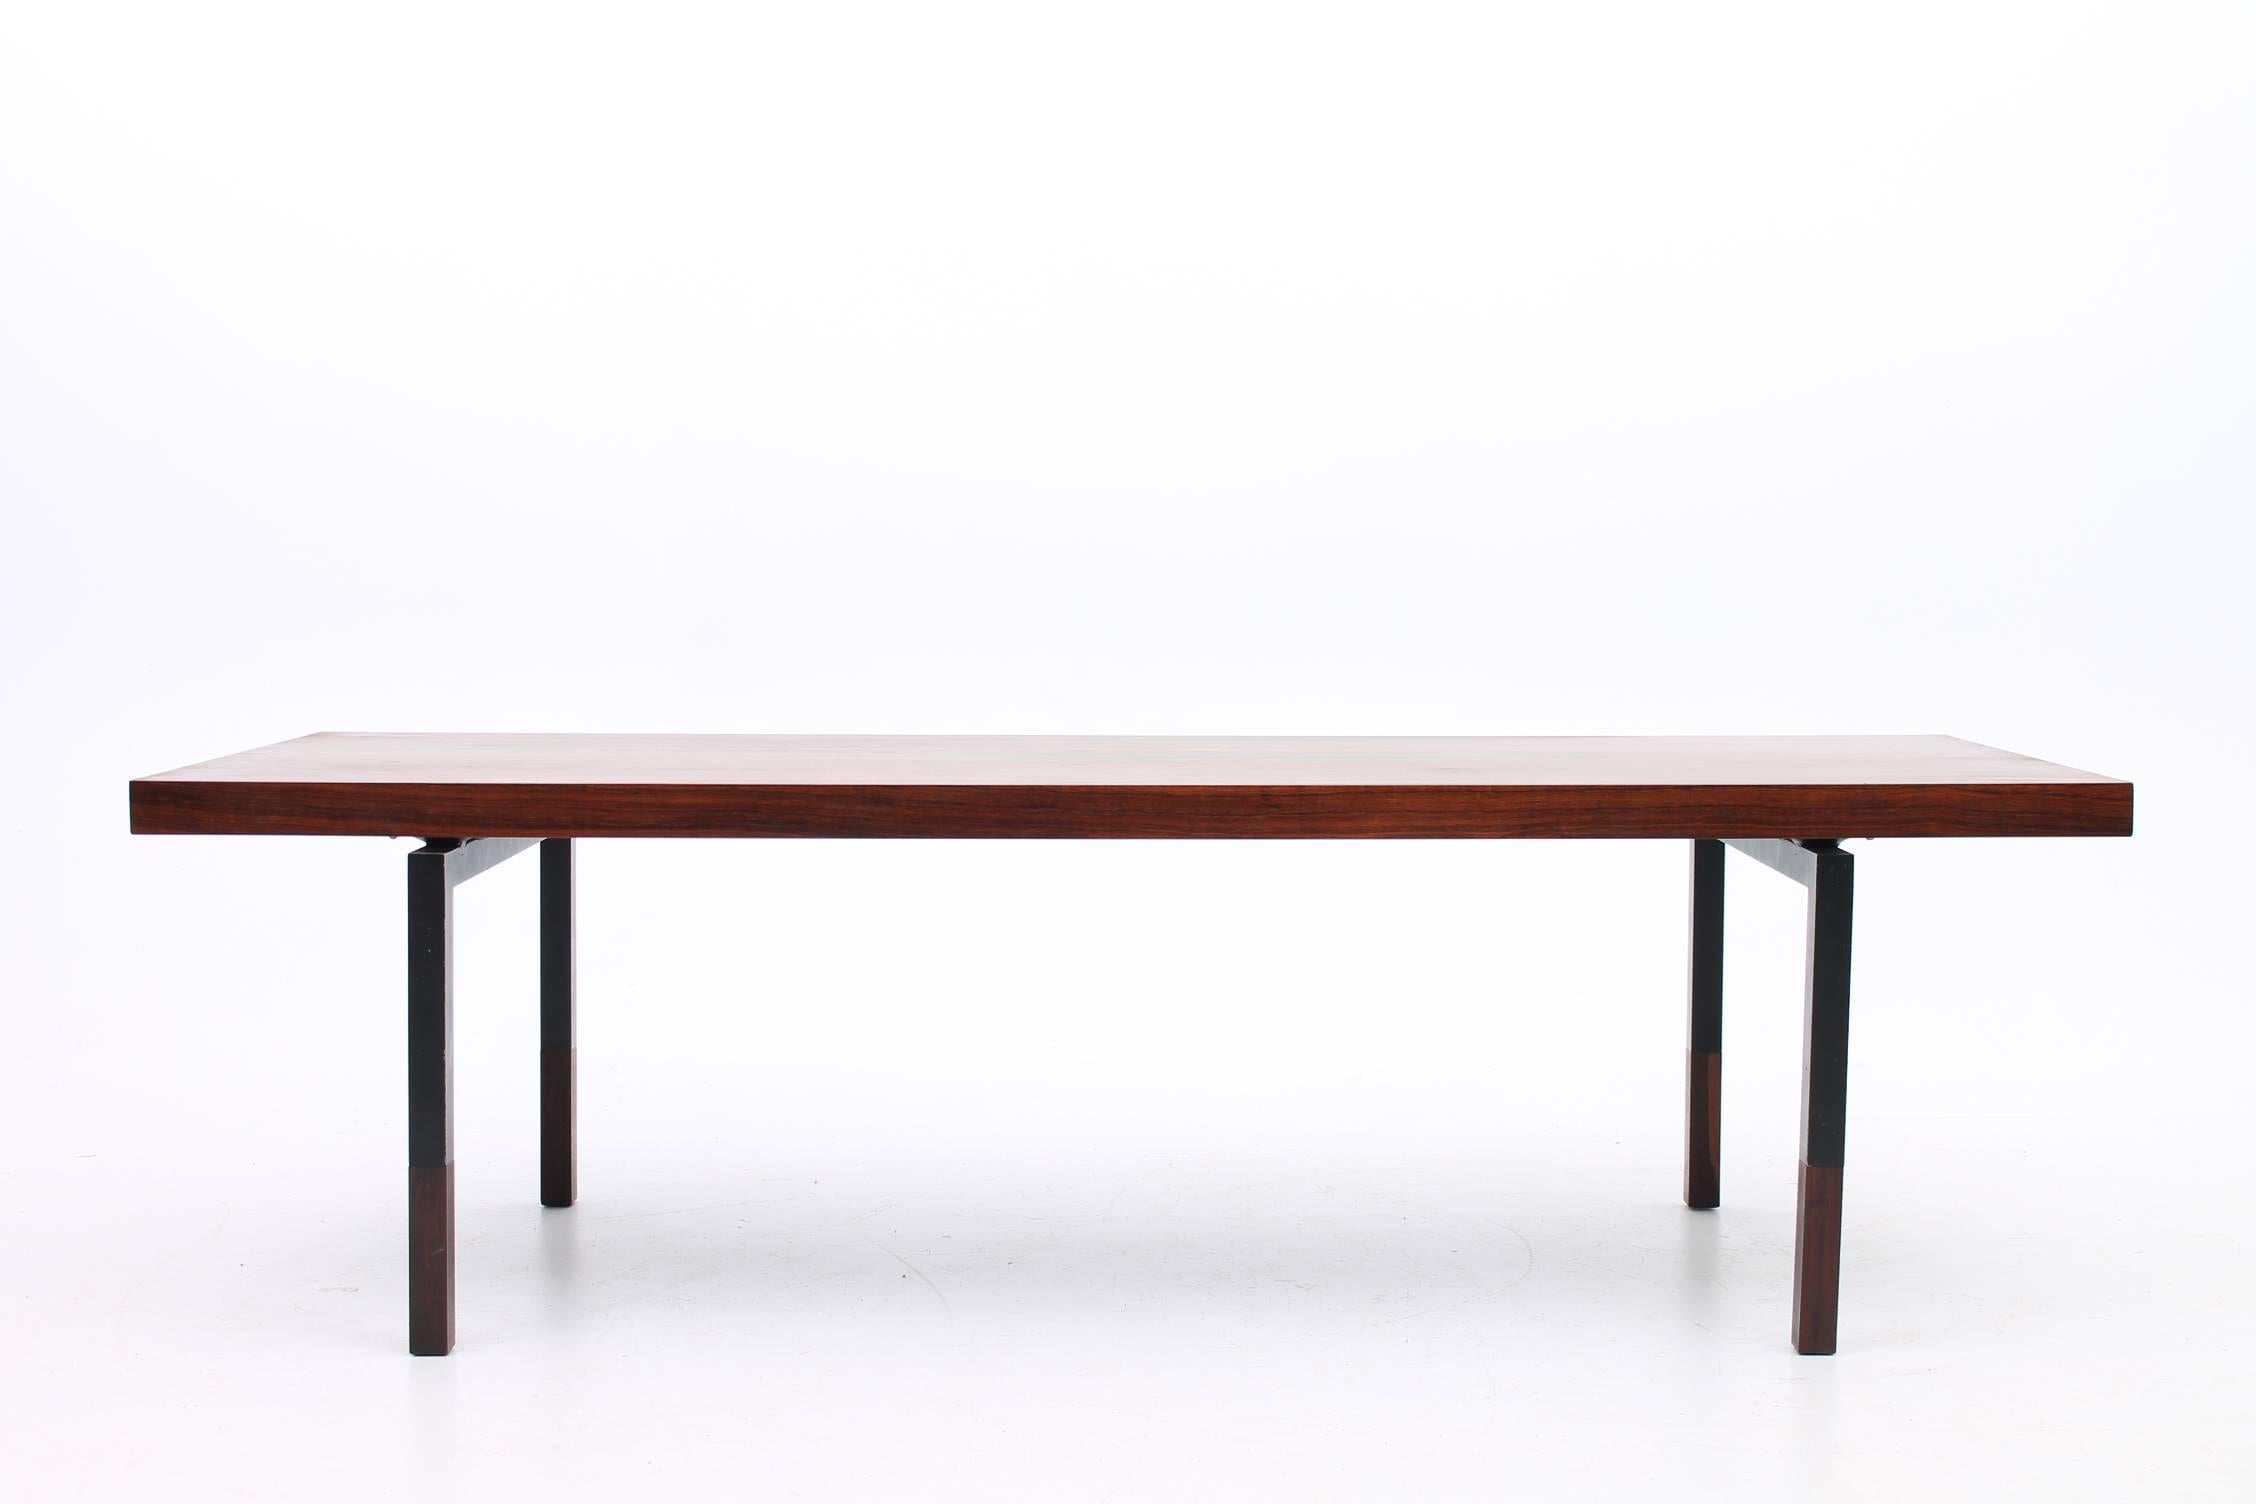 Minimalist coffee table made of rosewood designed by HW Klein for Bramin Møbler. This gorgeous coffee table has a solid rosewood top with a dark, beautiful grain. The tabletop floats above black steel legs with more rosewood detail at the feet. This